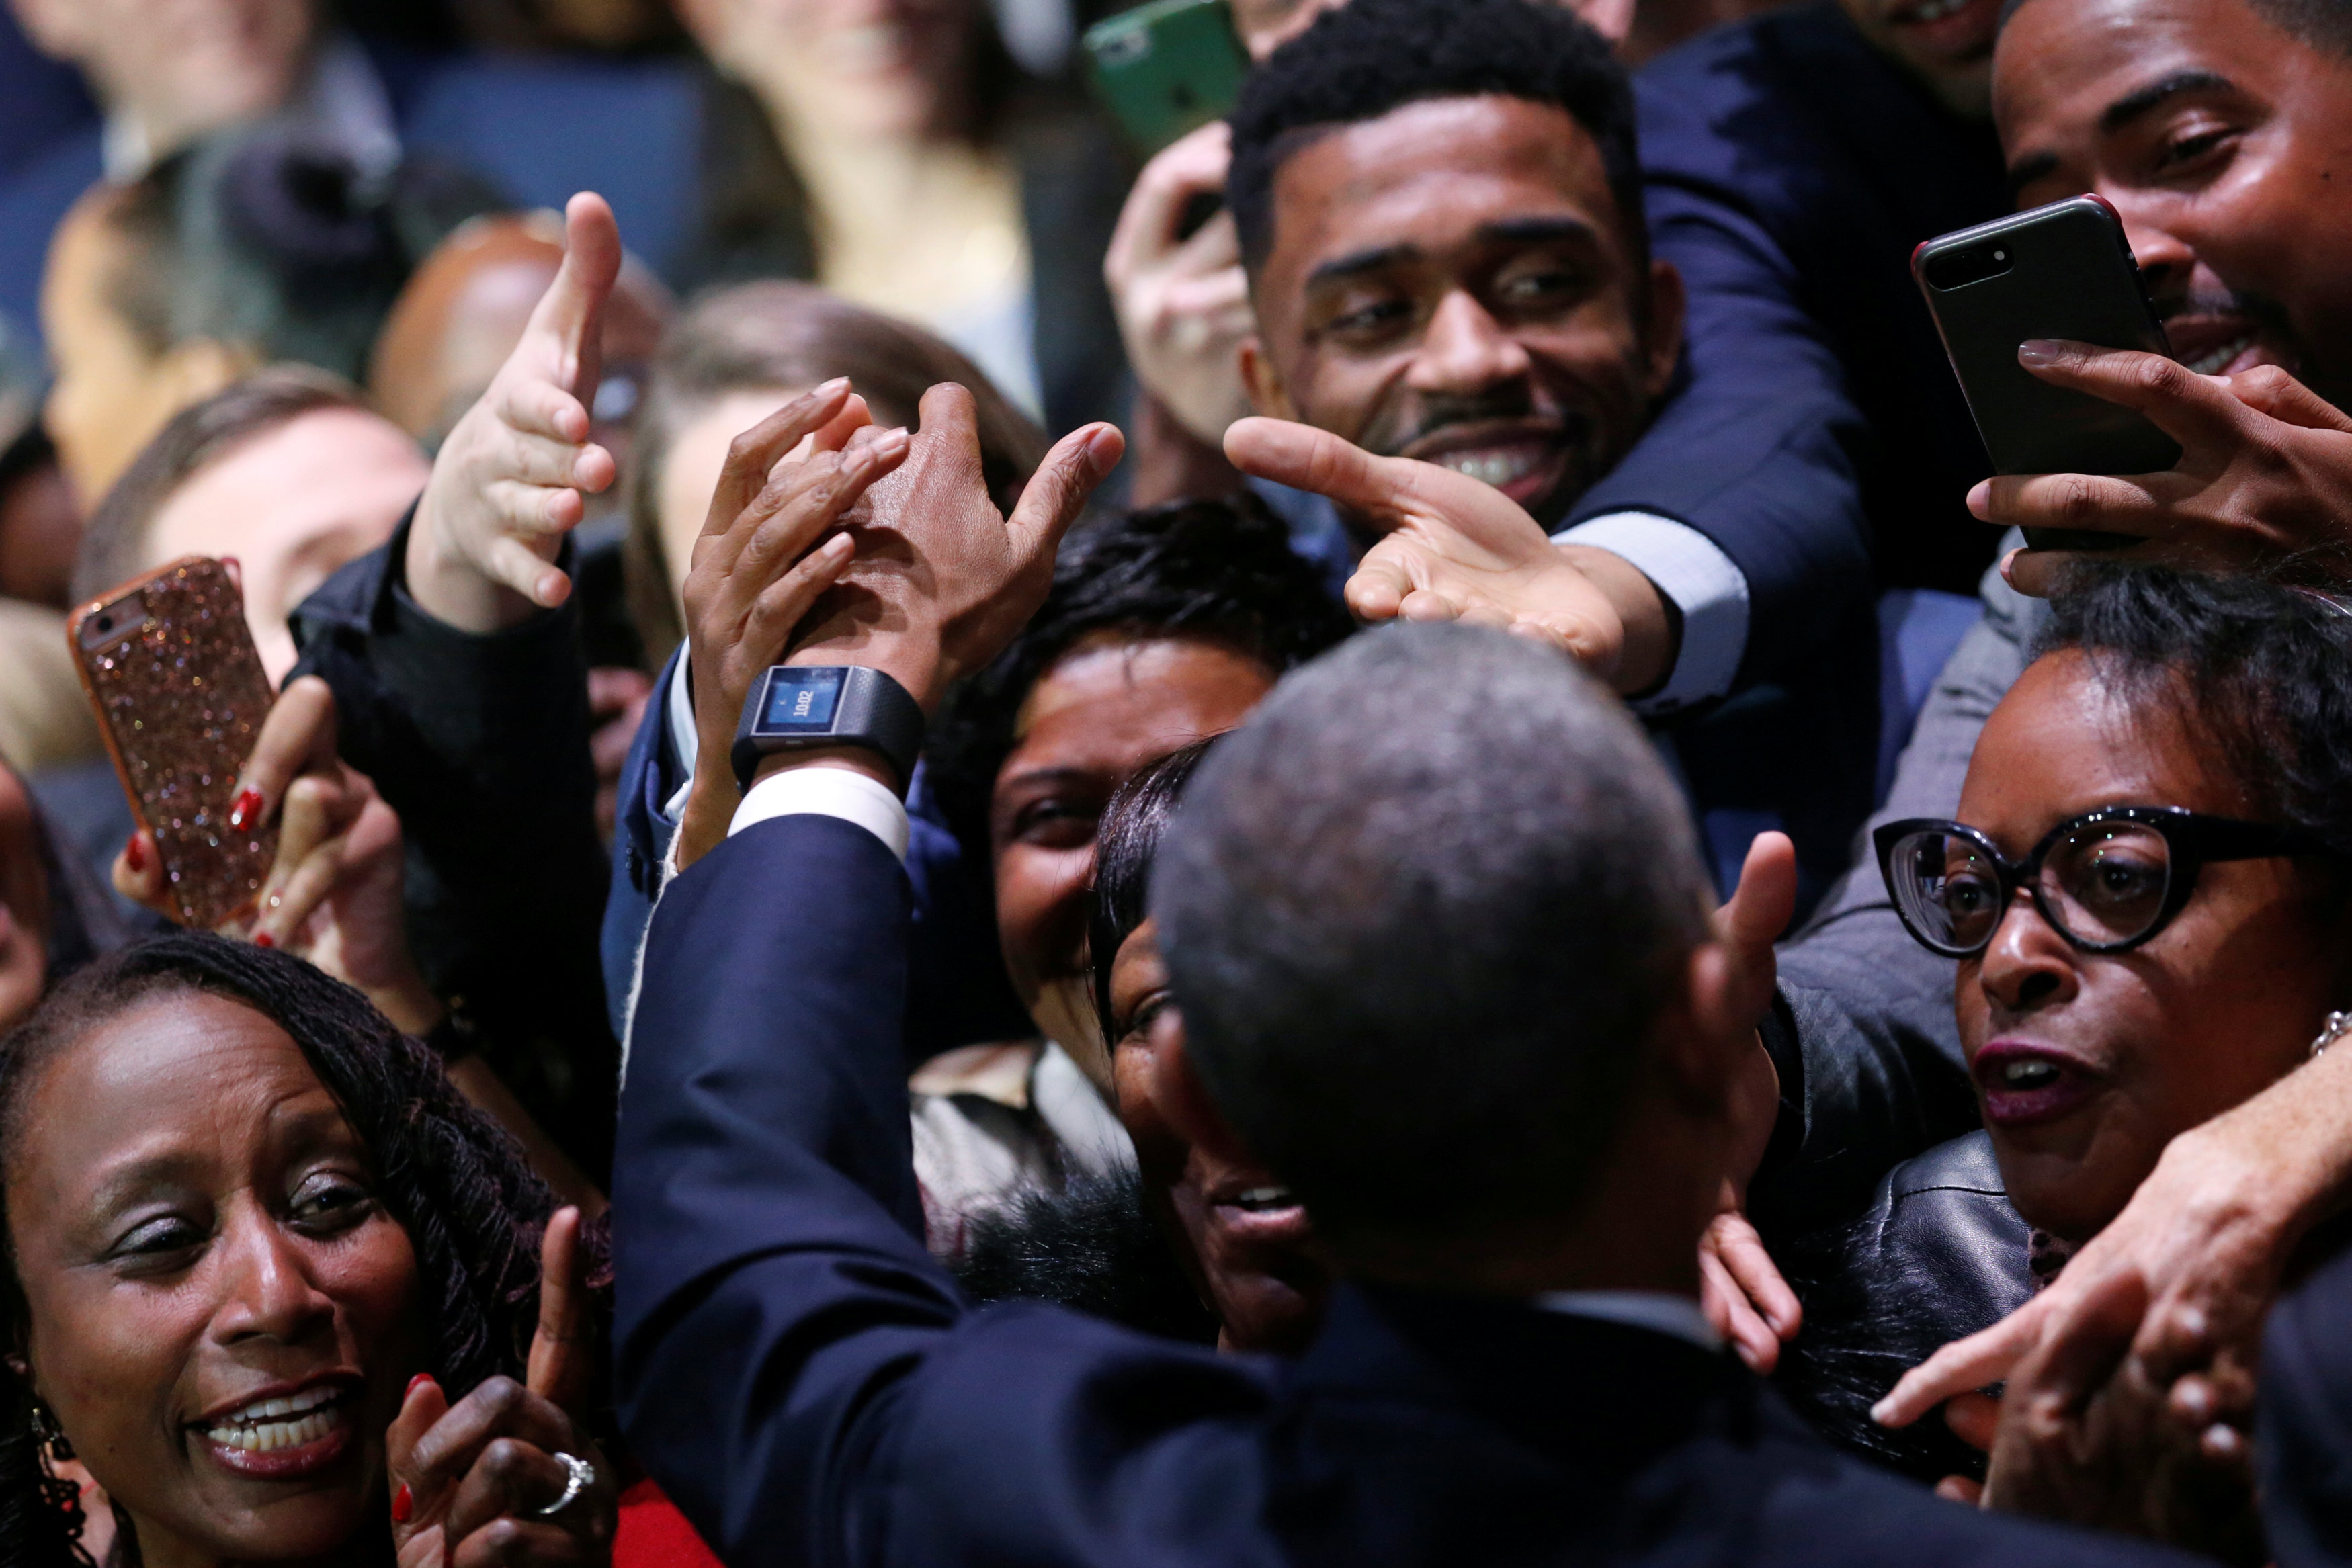 U.S. President Barack Obama greets people in the audience after his farewell address in Chicago, Illinois, U.S. January 10, 2017. REUTERS/Jonathan Ernst